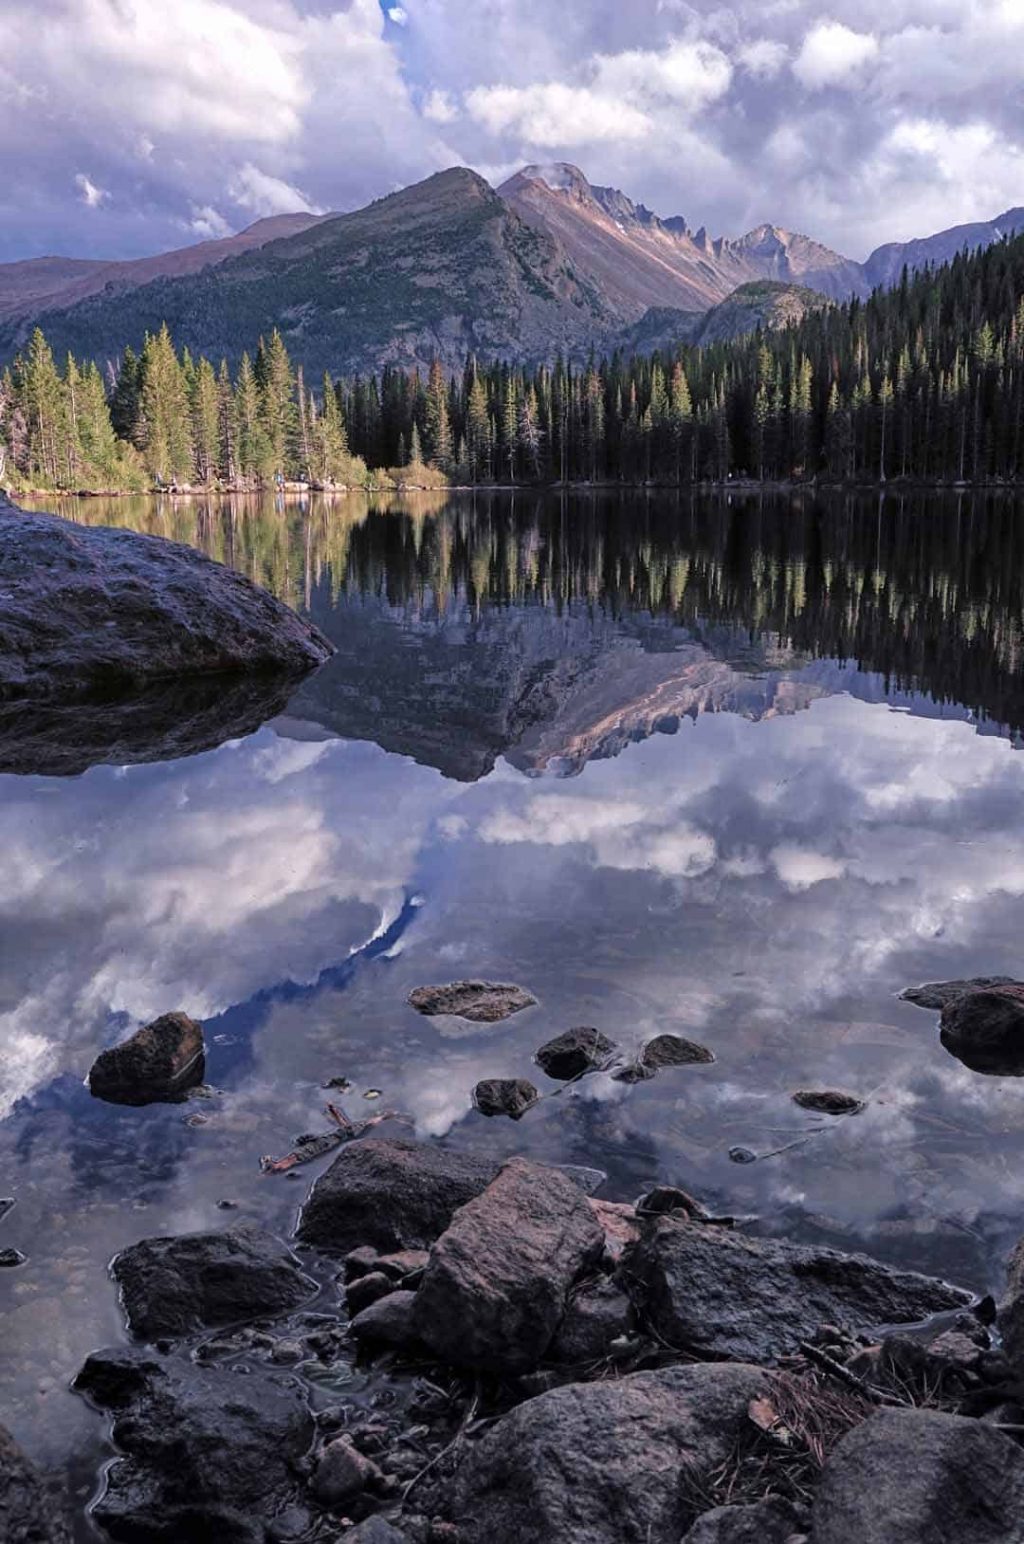 The only mountain risking above 14,000 in Rocky Mountain National Park, Longs Peak is reflected in the glass-like water of Bear Lake on a cloudy autumn evening.